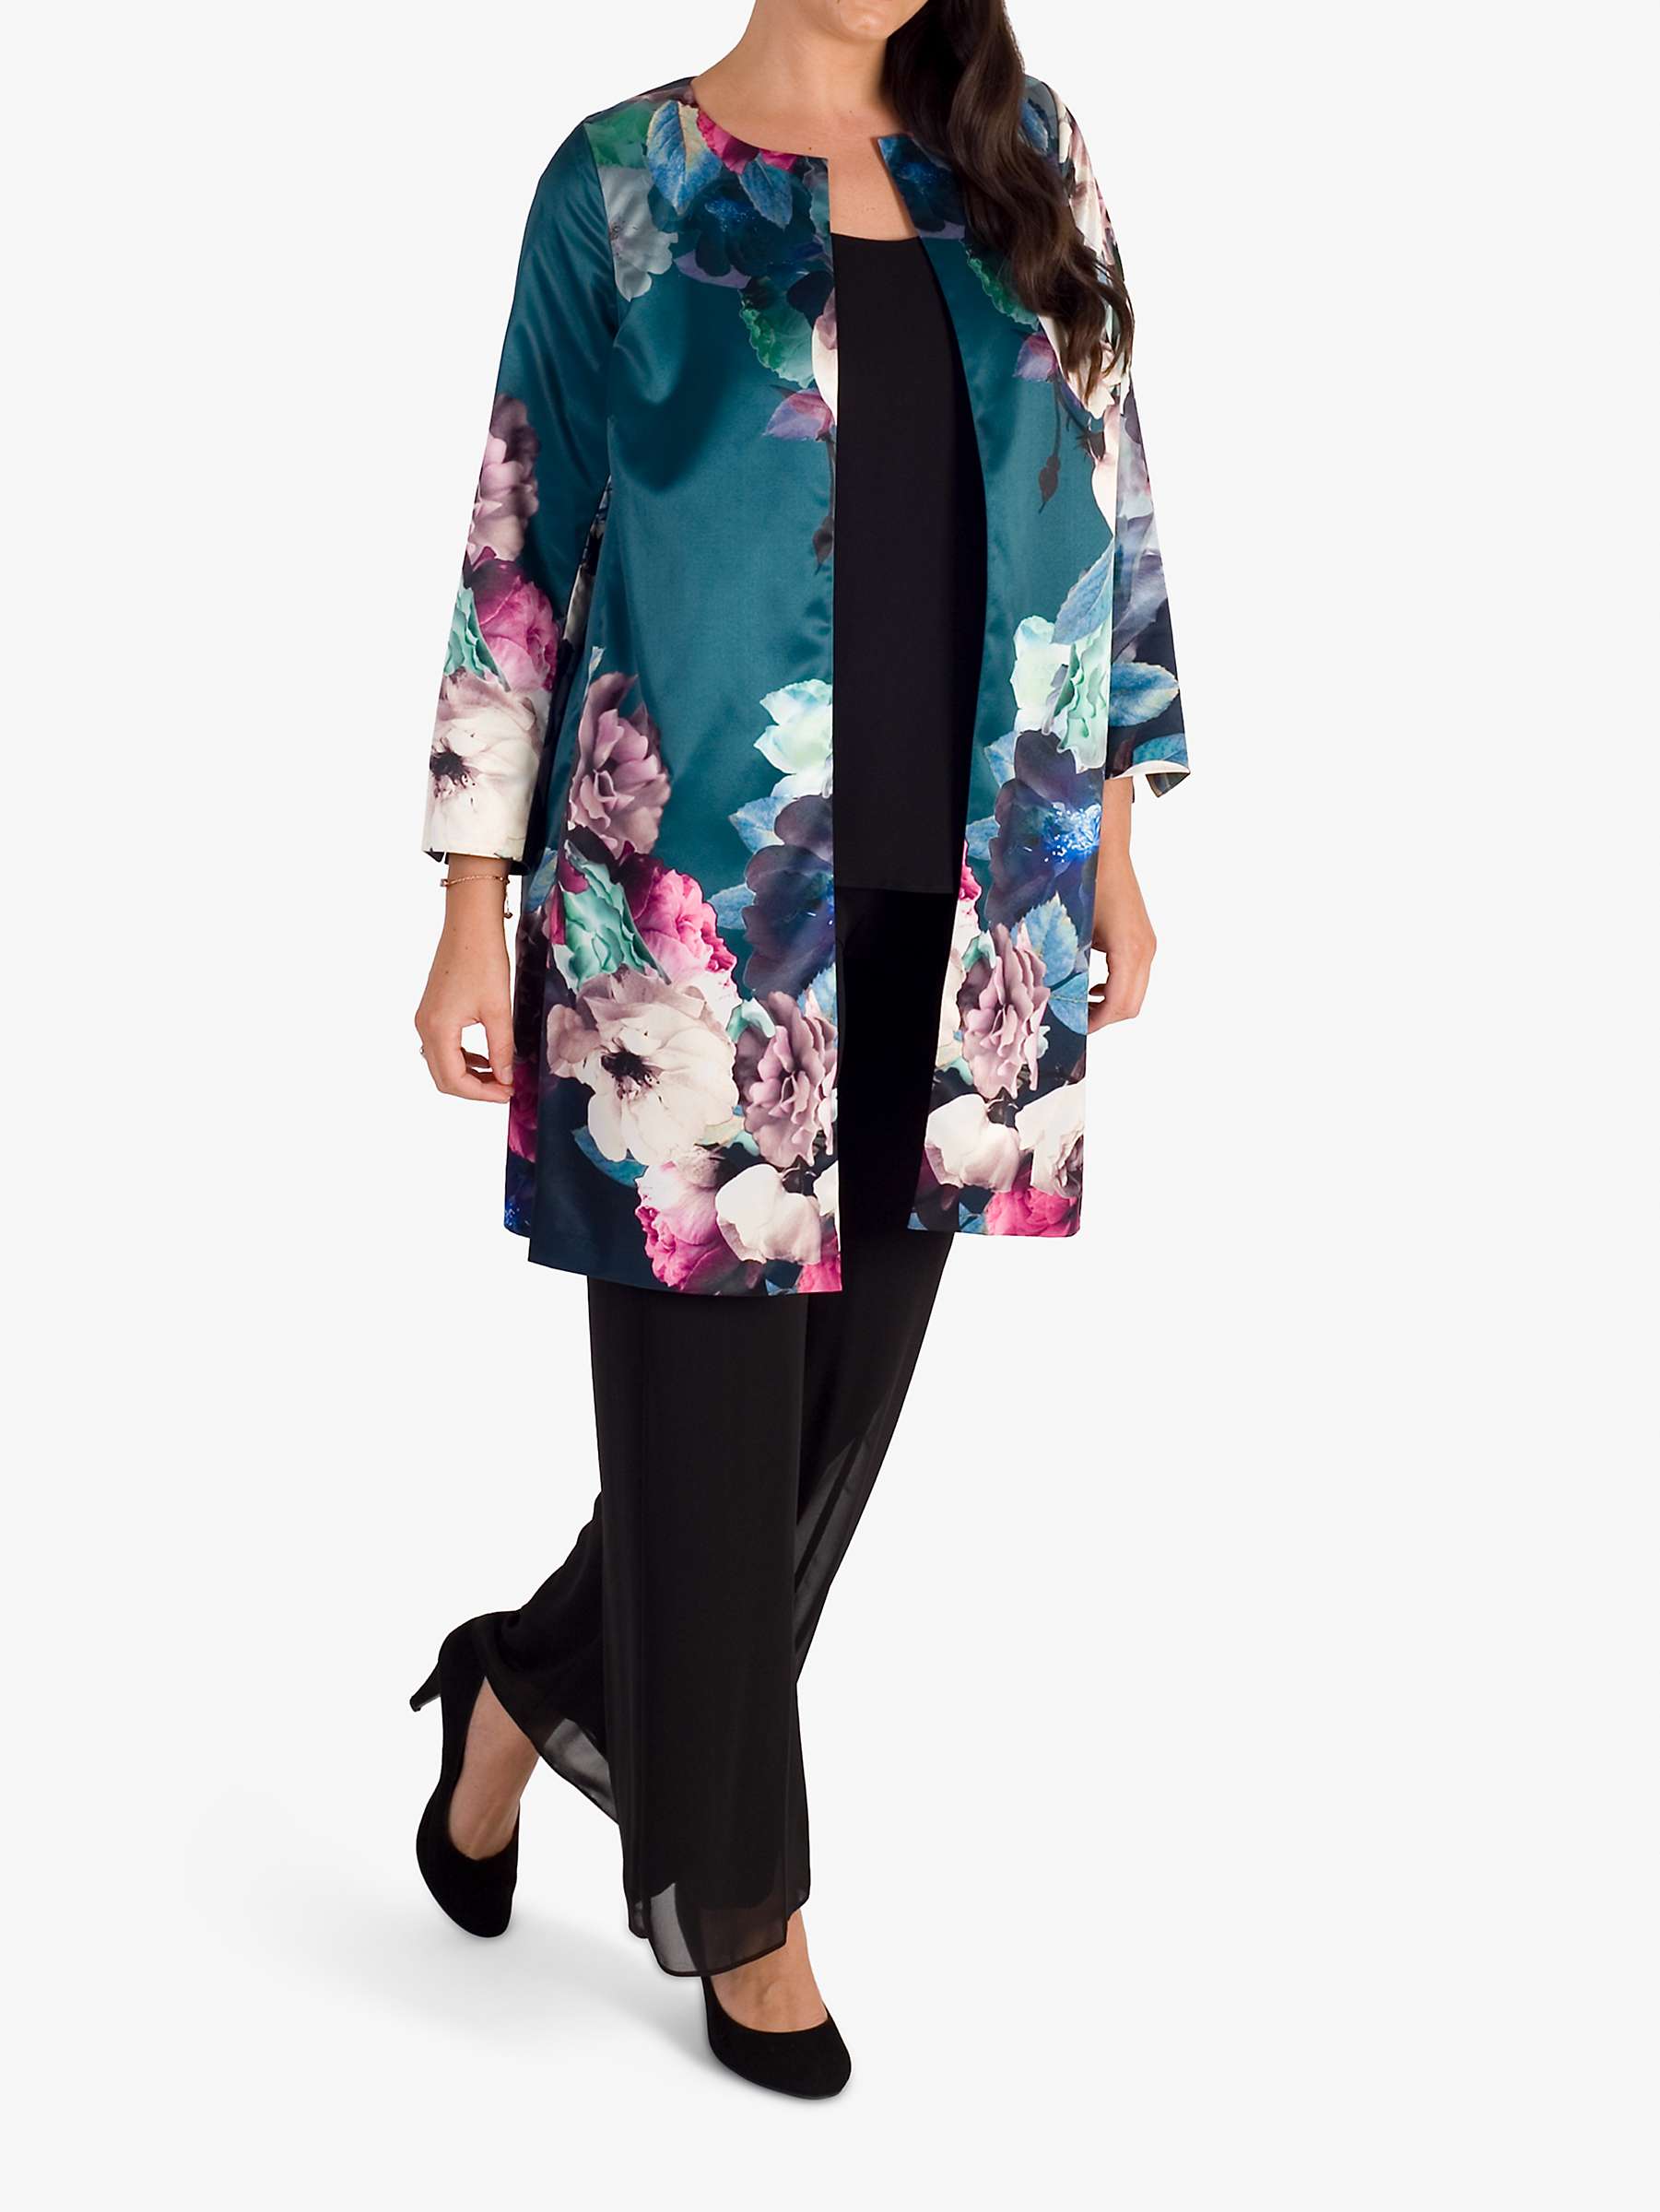 Buy chesca Oversized Floral Jacket, Green/Multi Online at johnlewis.com